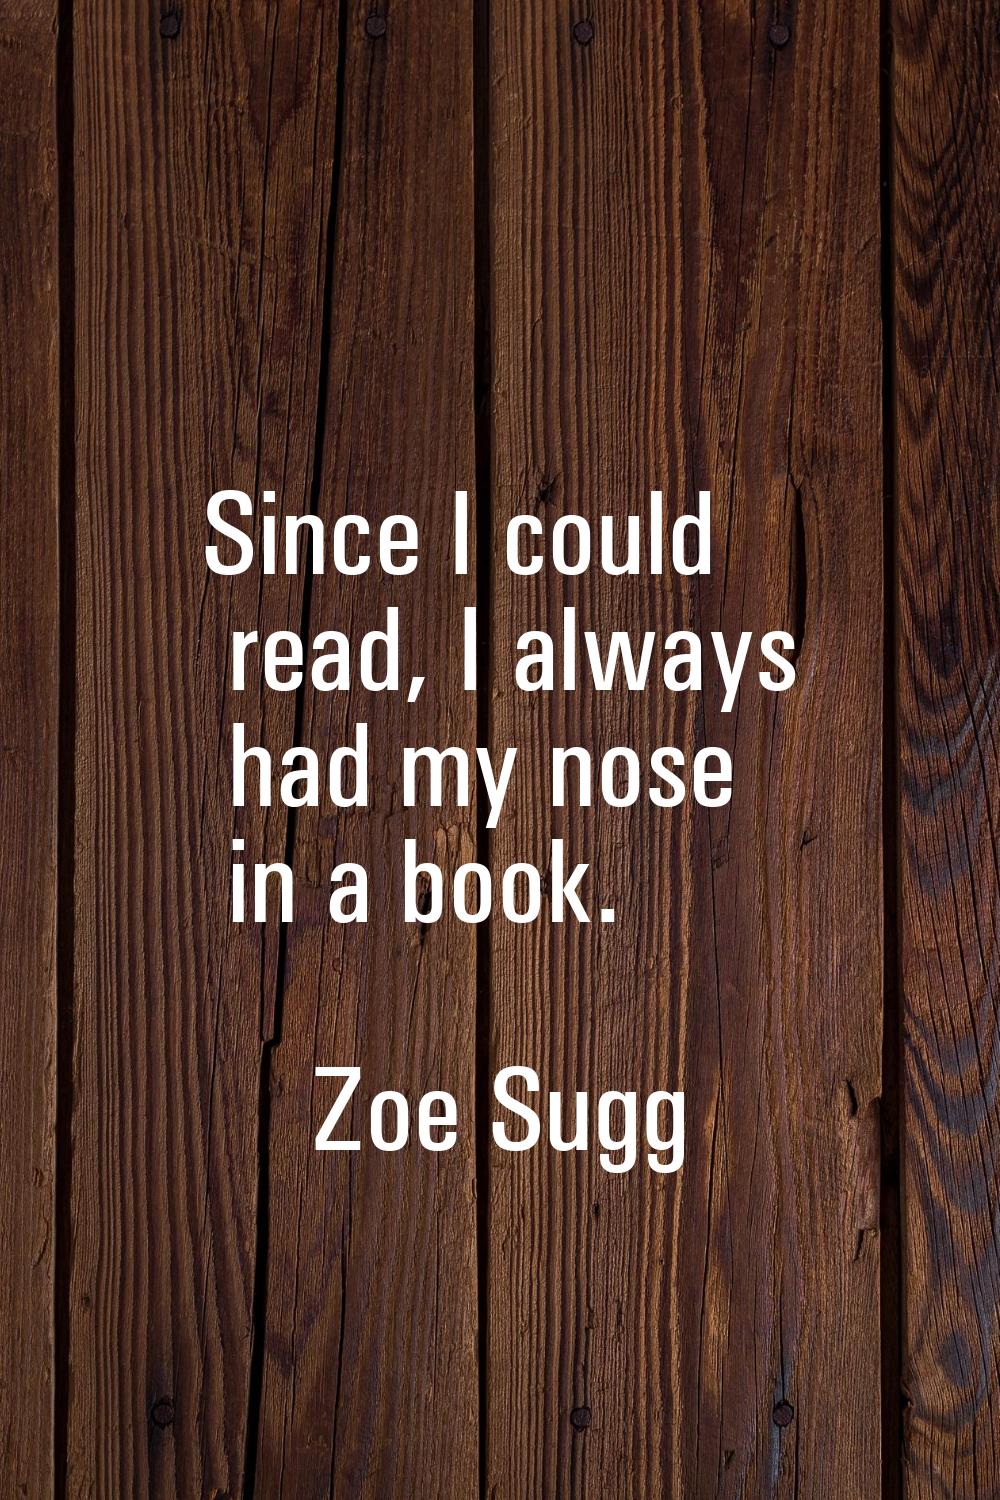 Since I could read, I always had my nose in a book.